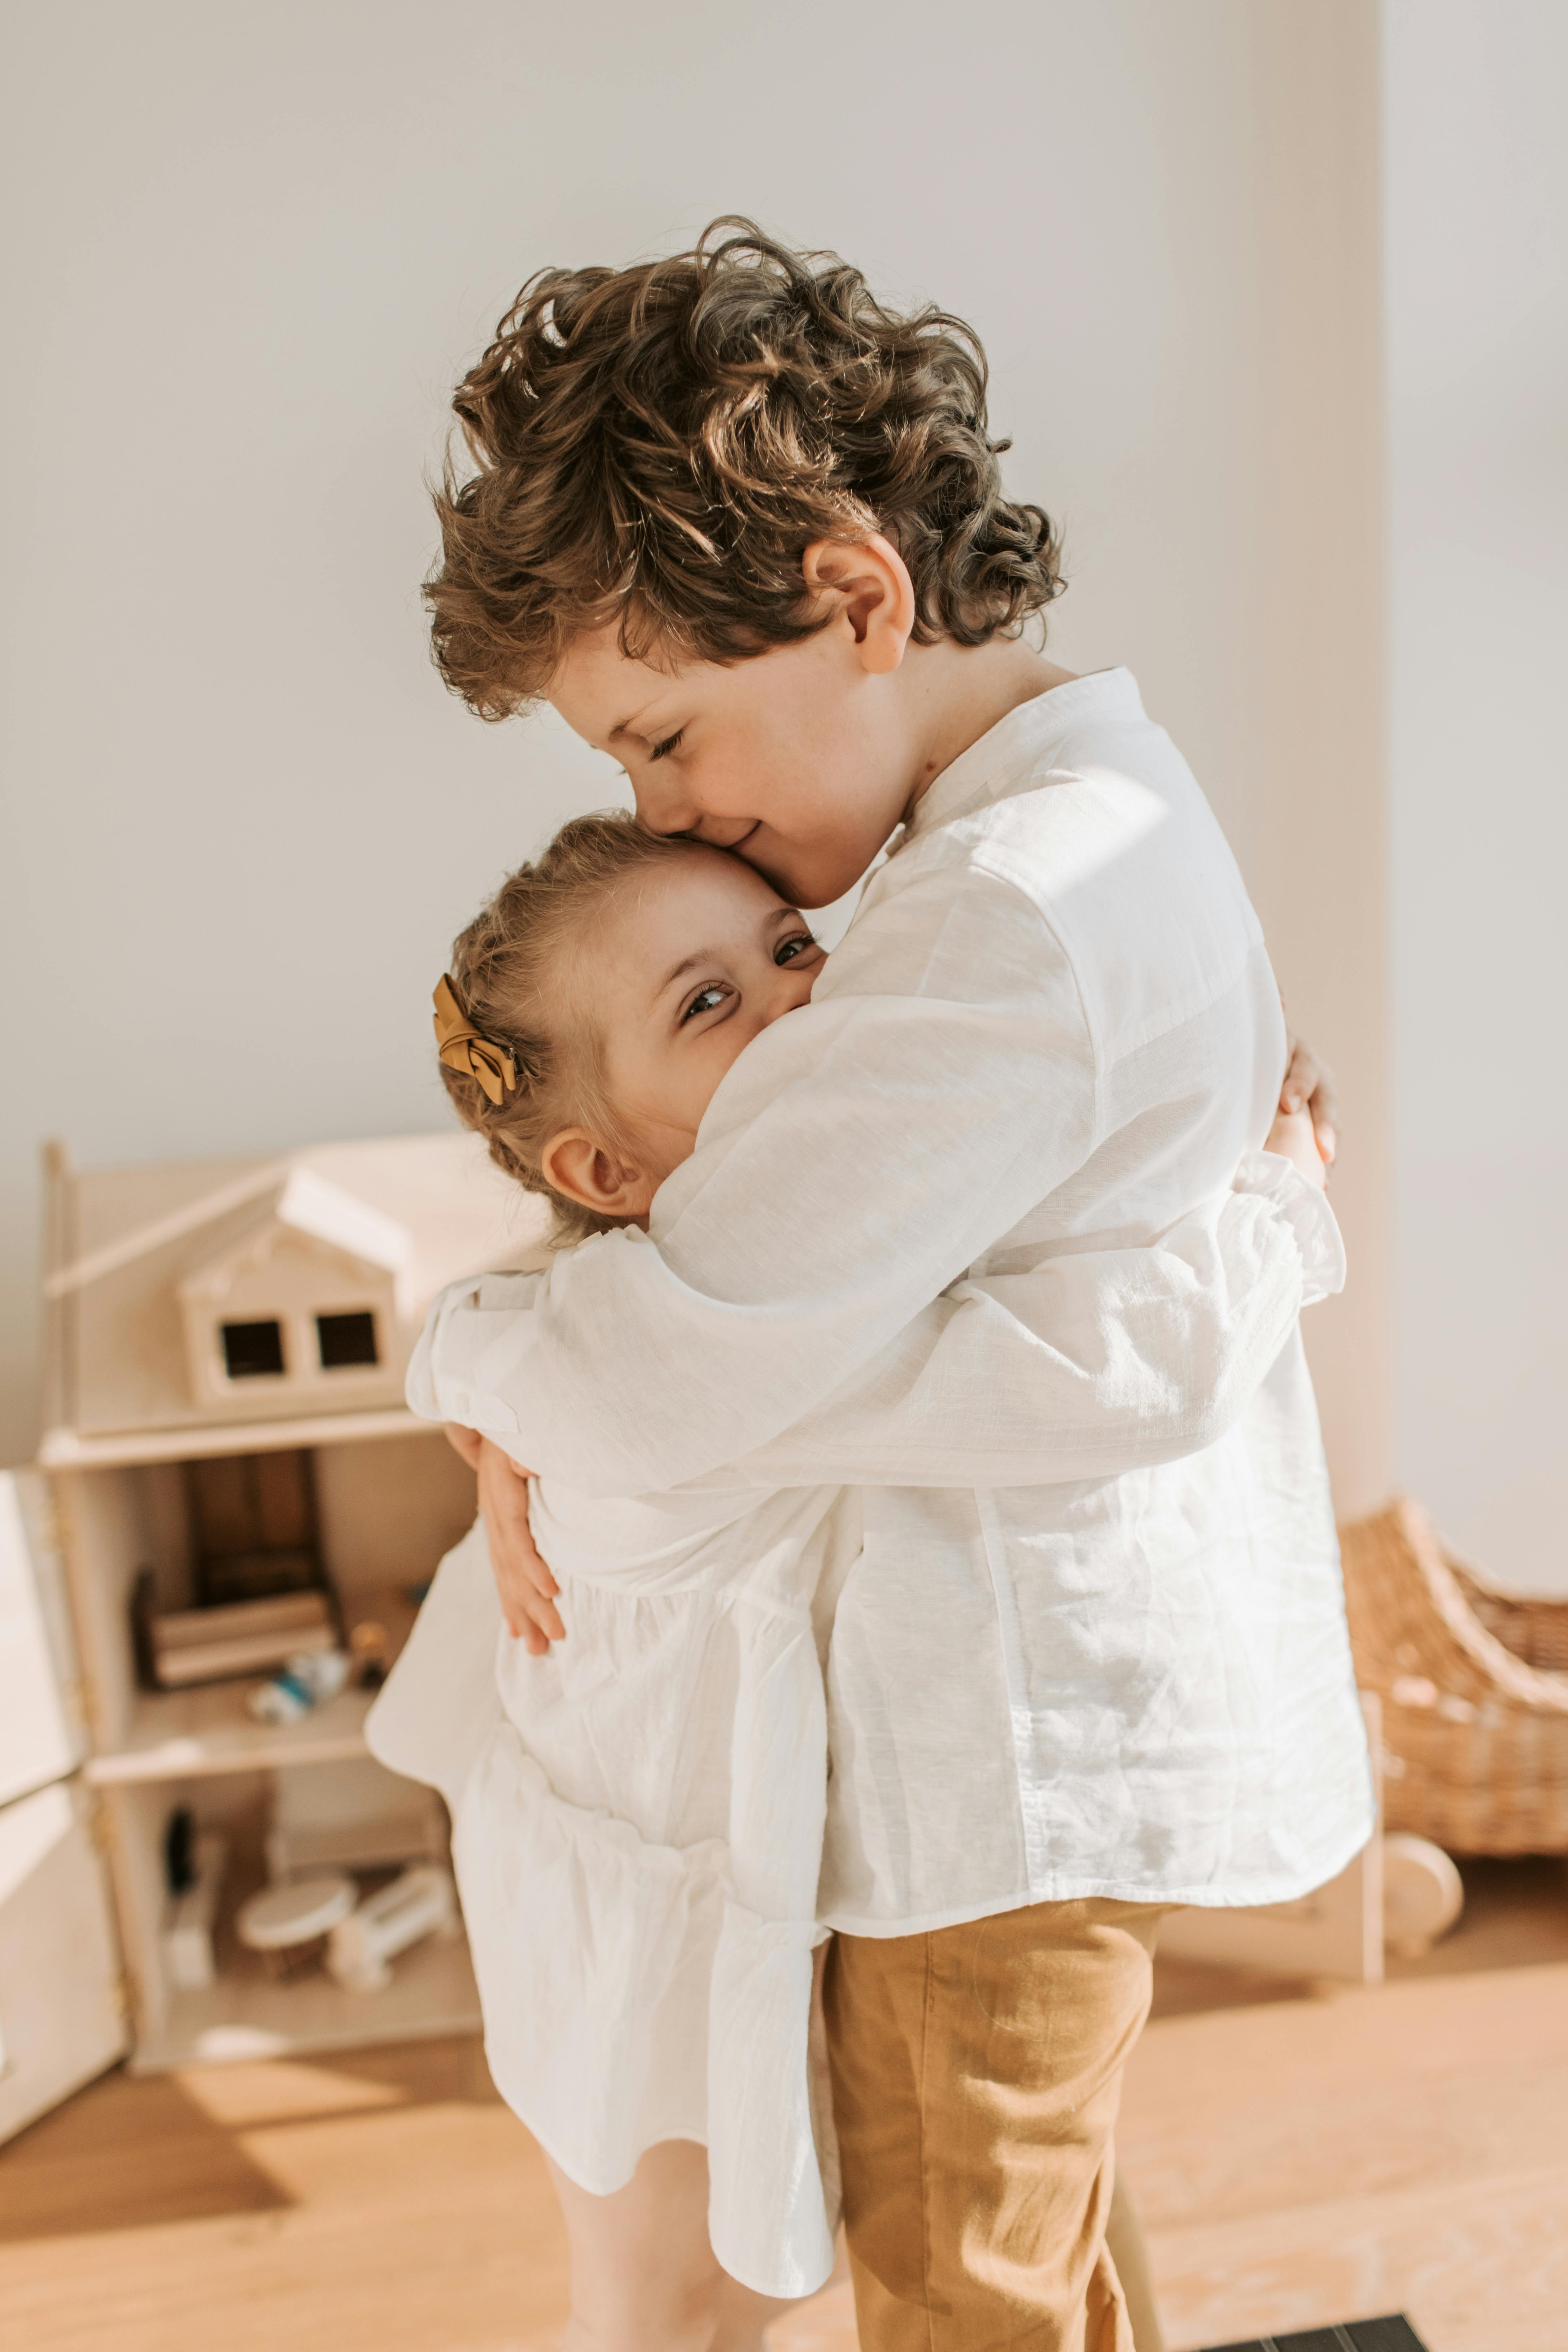 Older brother and younger sister | Source: Pexels